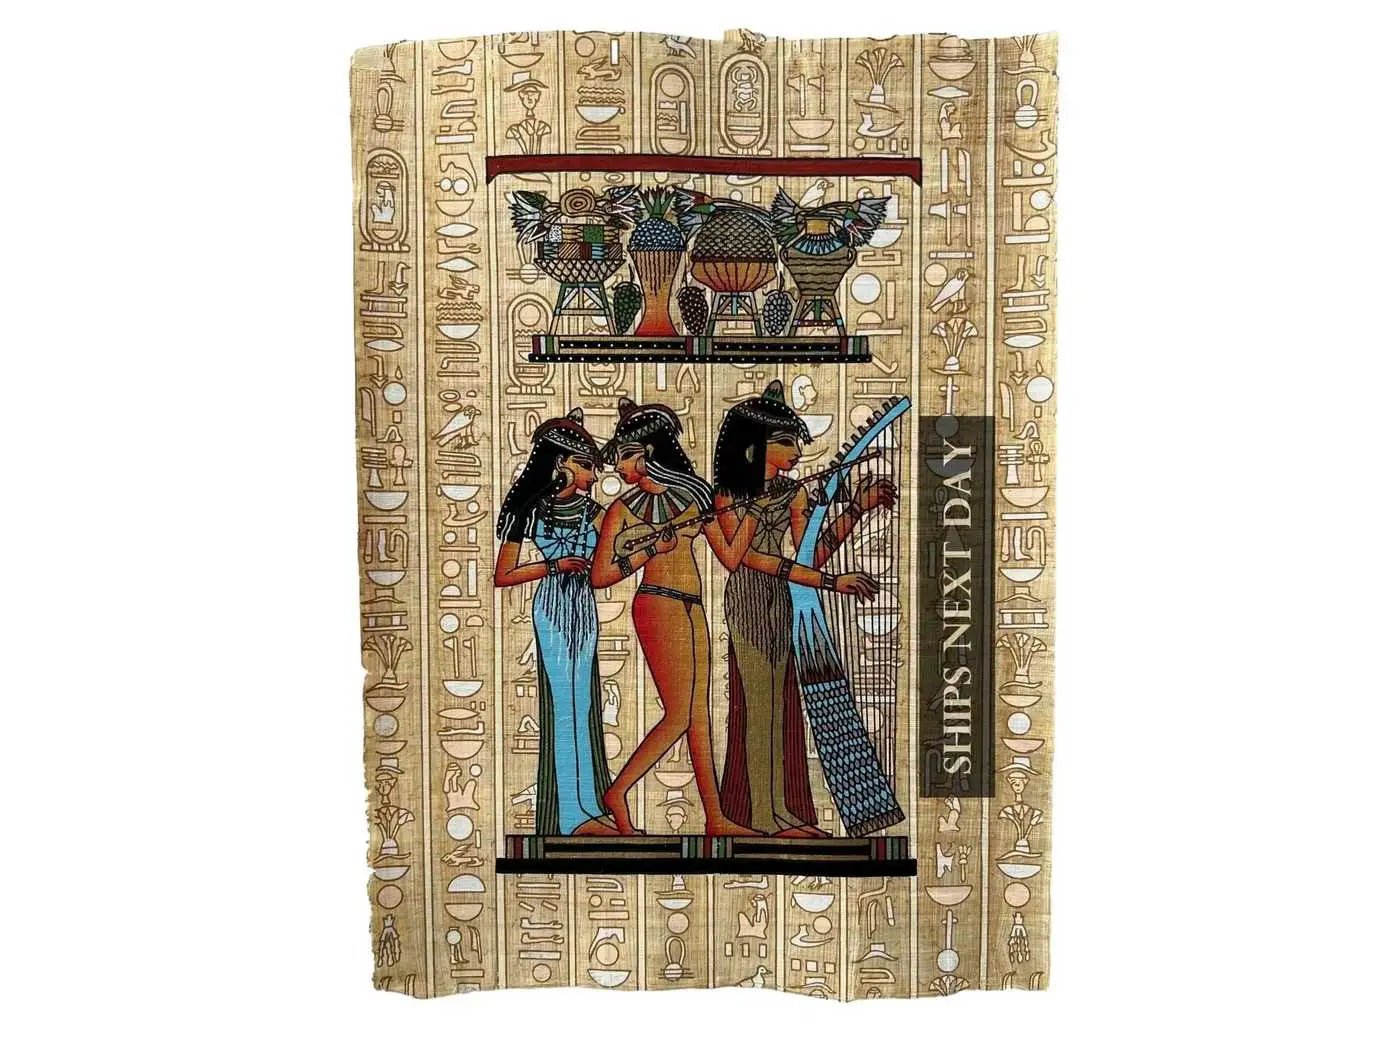 Egypt Art Musicians of Amun - Gift for Music Lovers - Bedroom Wall Art - Authentic Hand Painted